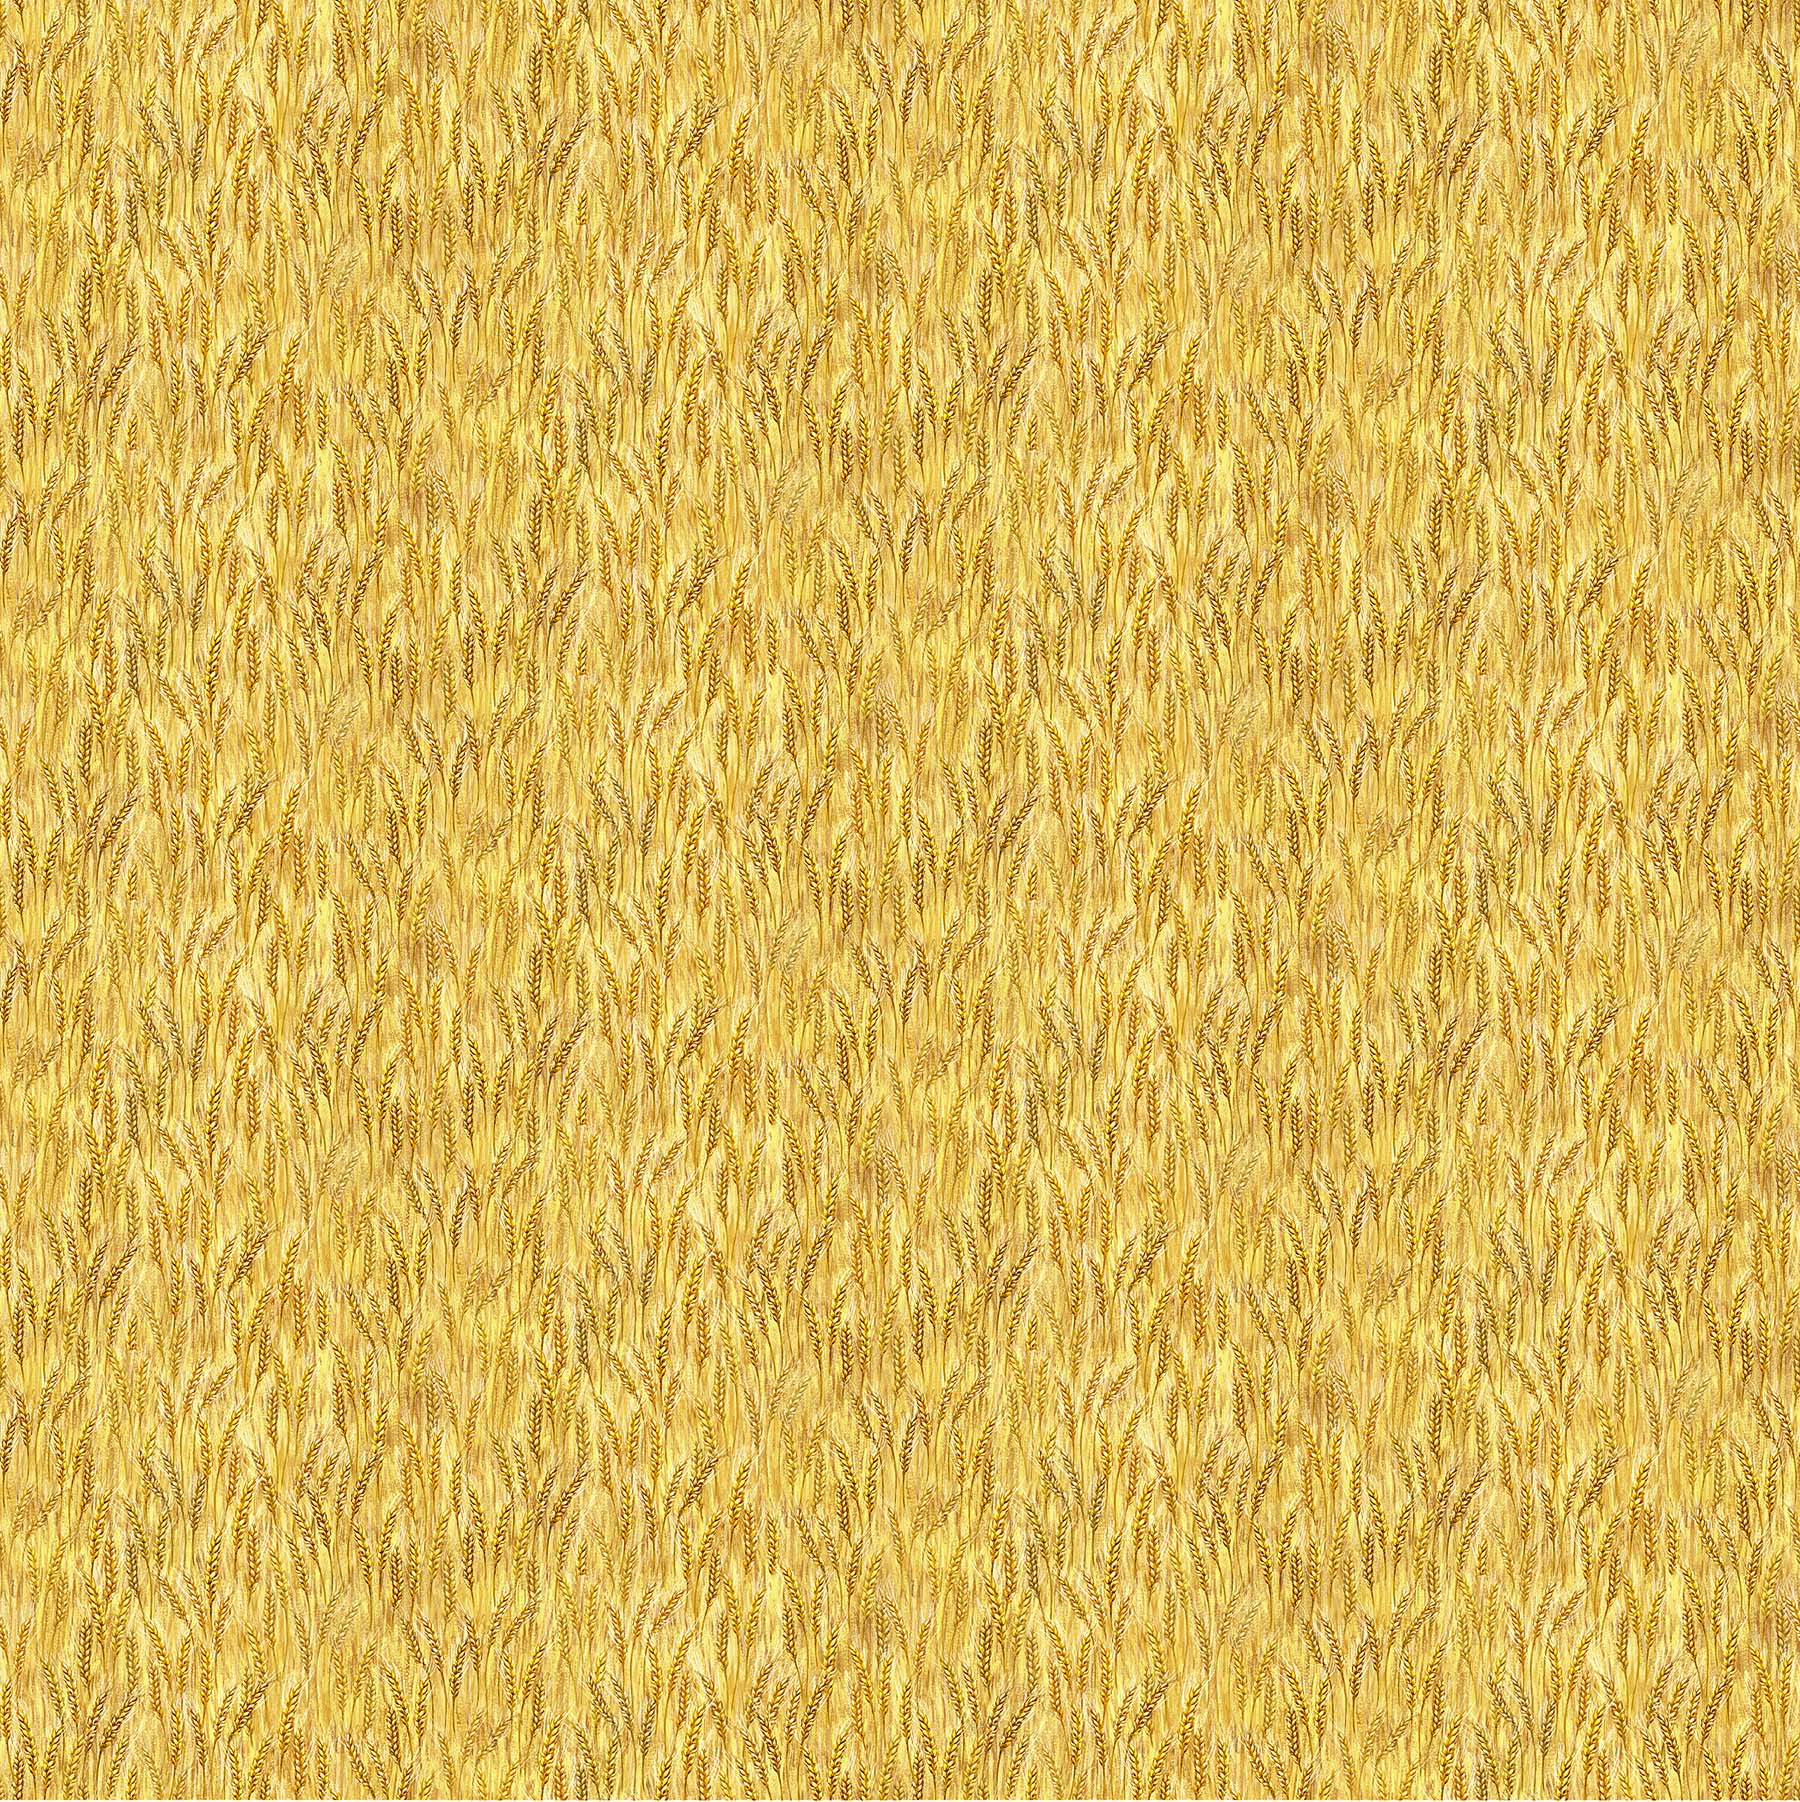 Homegrown Happiness Wheat 100% Cotton Fabric - 24365-52 - By the Yard - Yellow